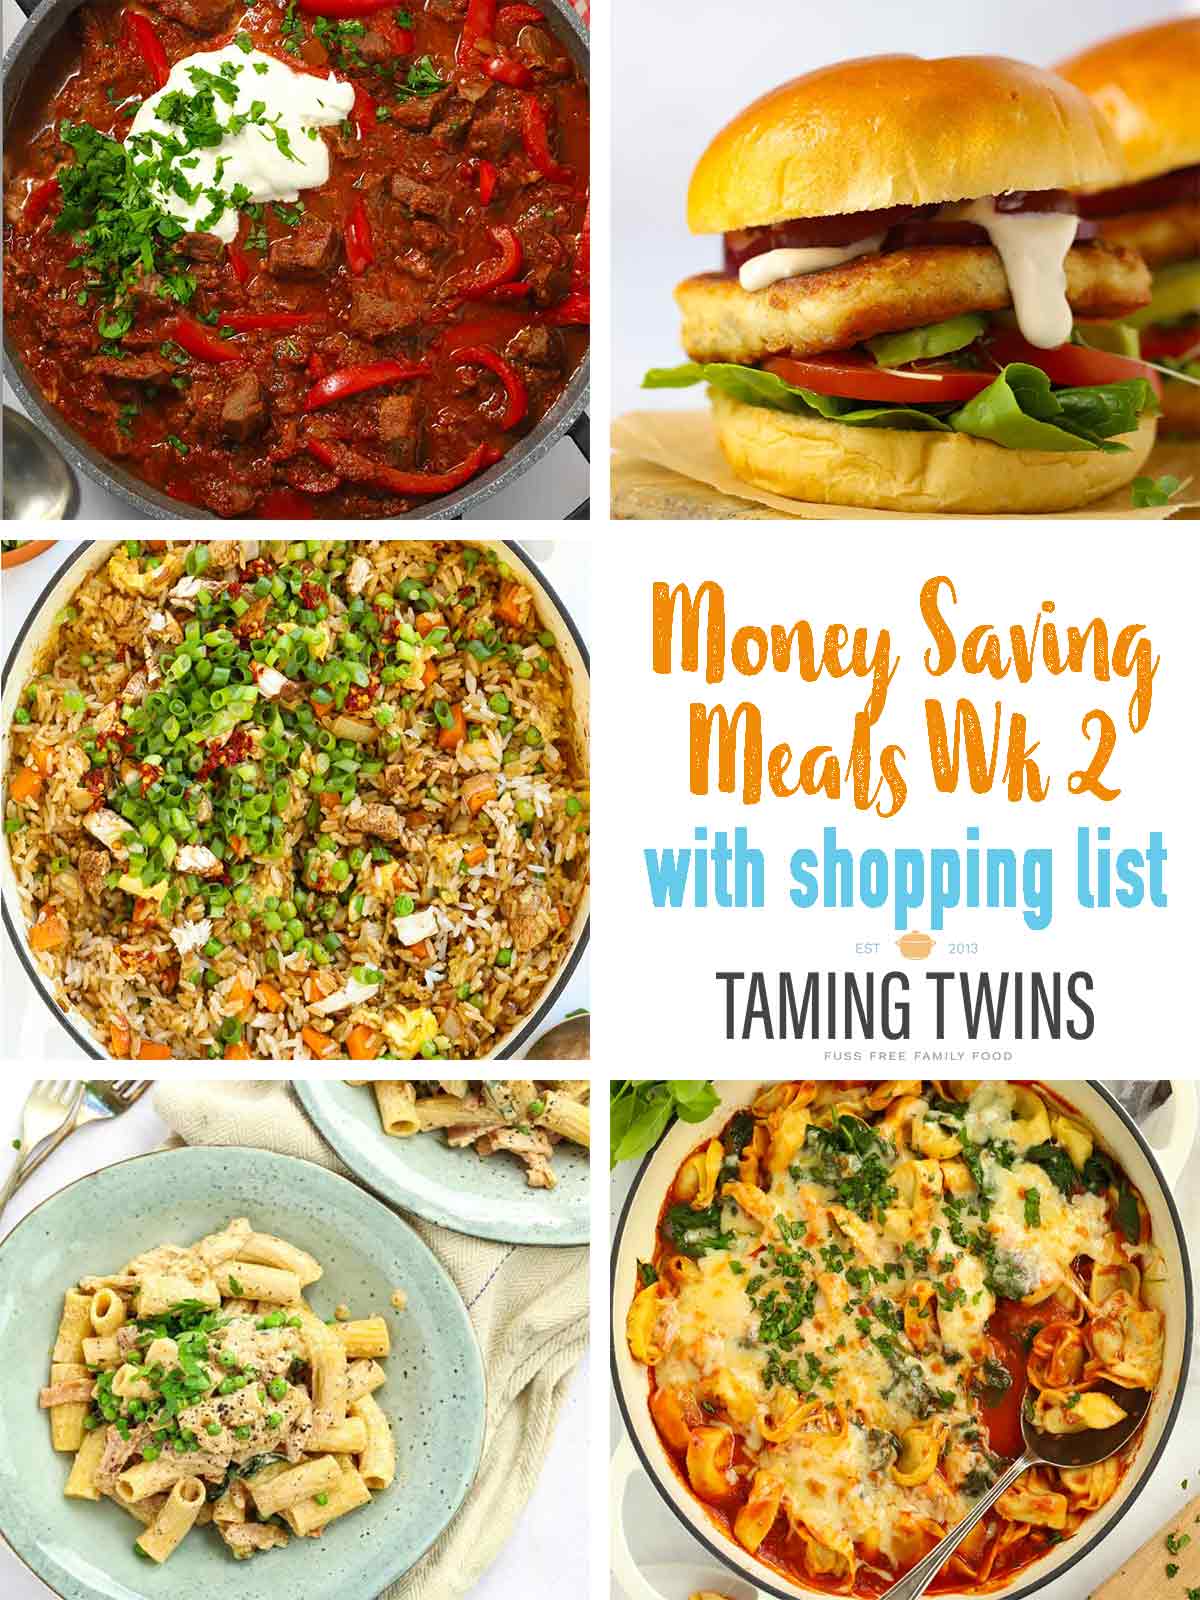 The front page of Taming Twins' budget meal plan week 2, named Money Saving Meals, with images of 5 family friendly recipes.